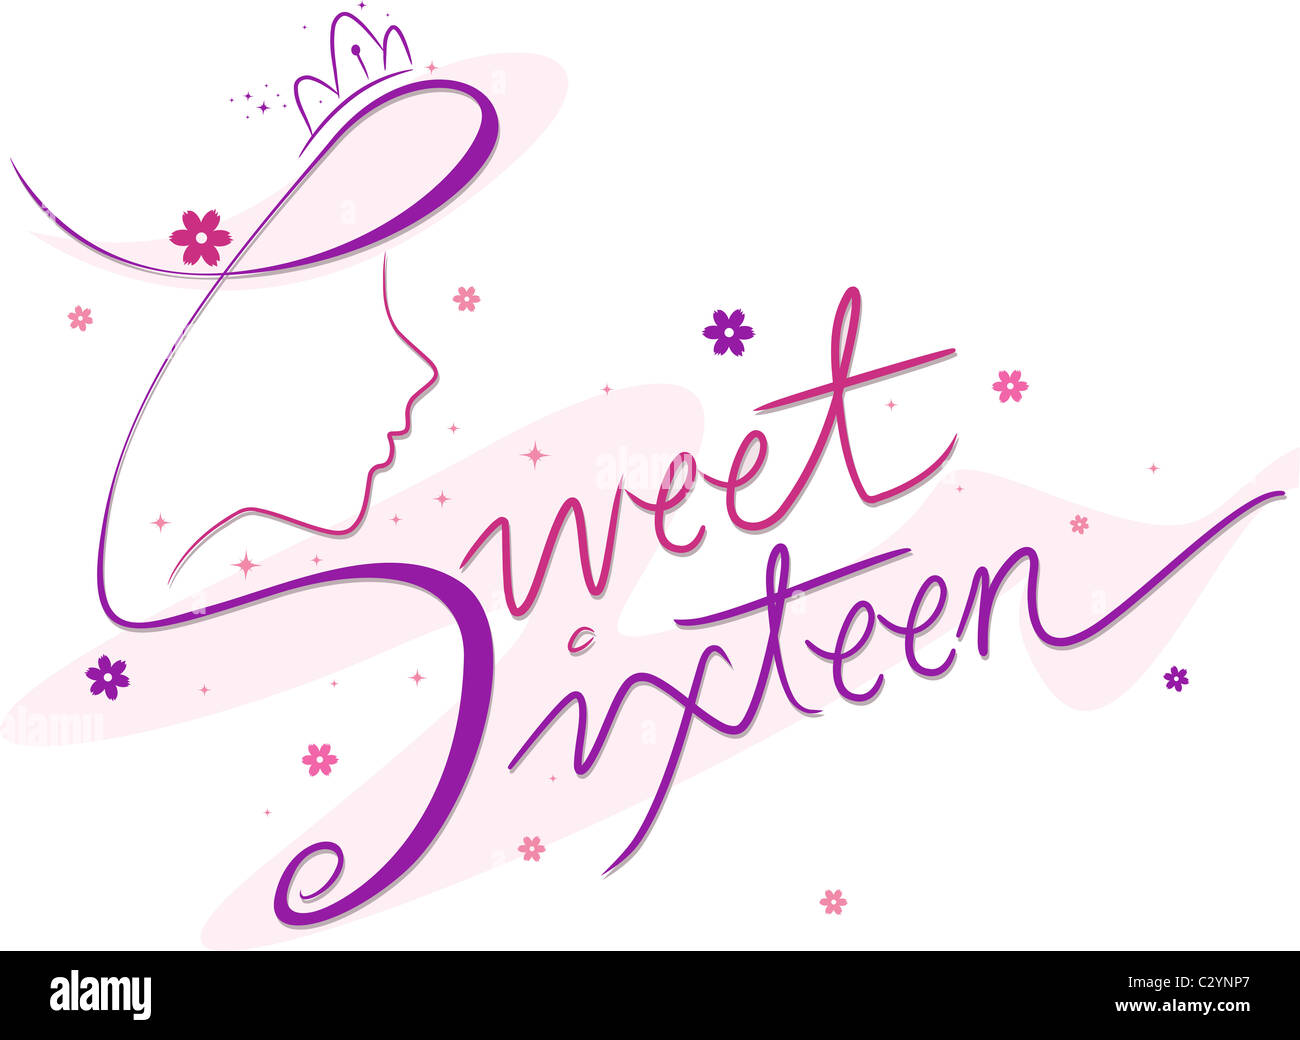 Text Featuring the Words Sweet Sixteen Stock Photo